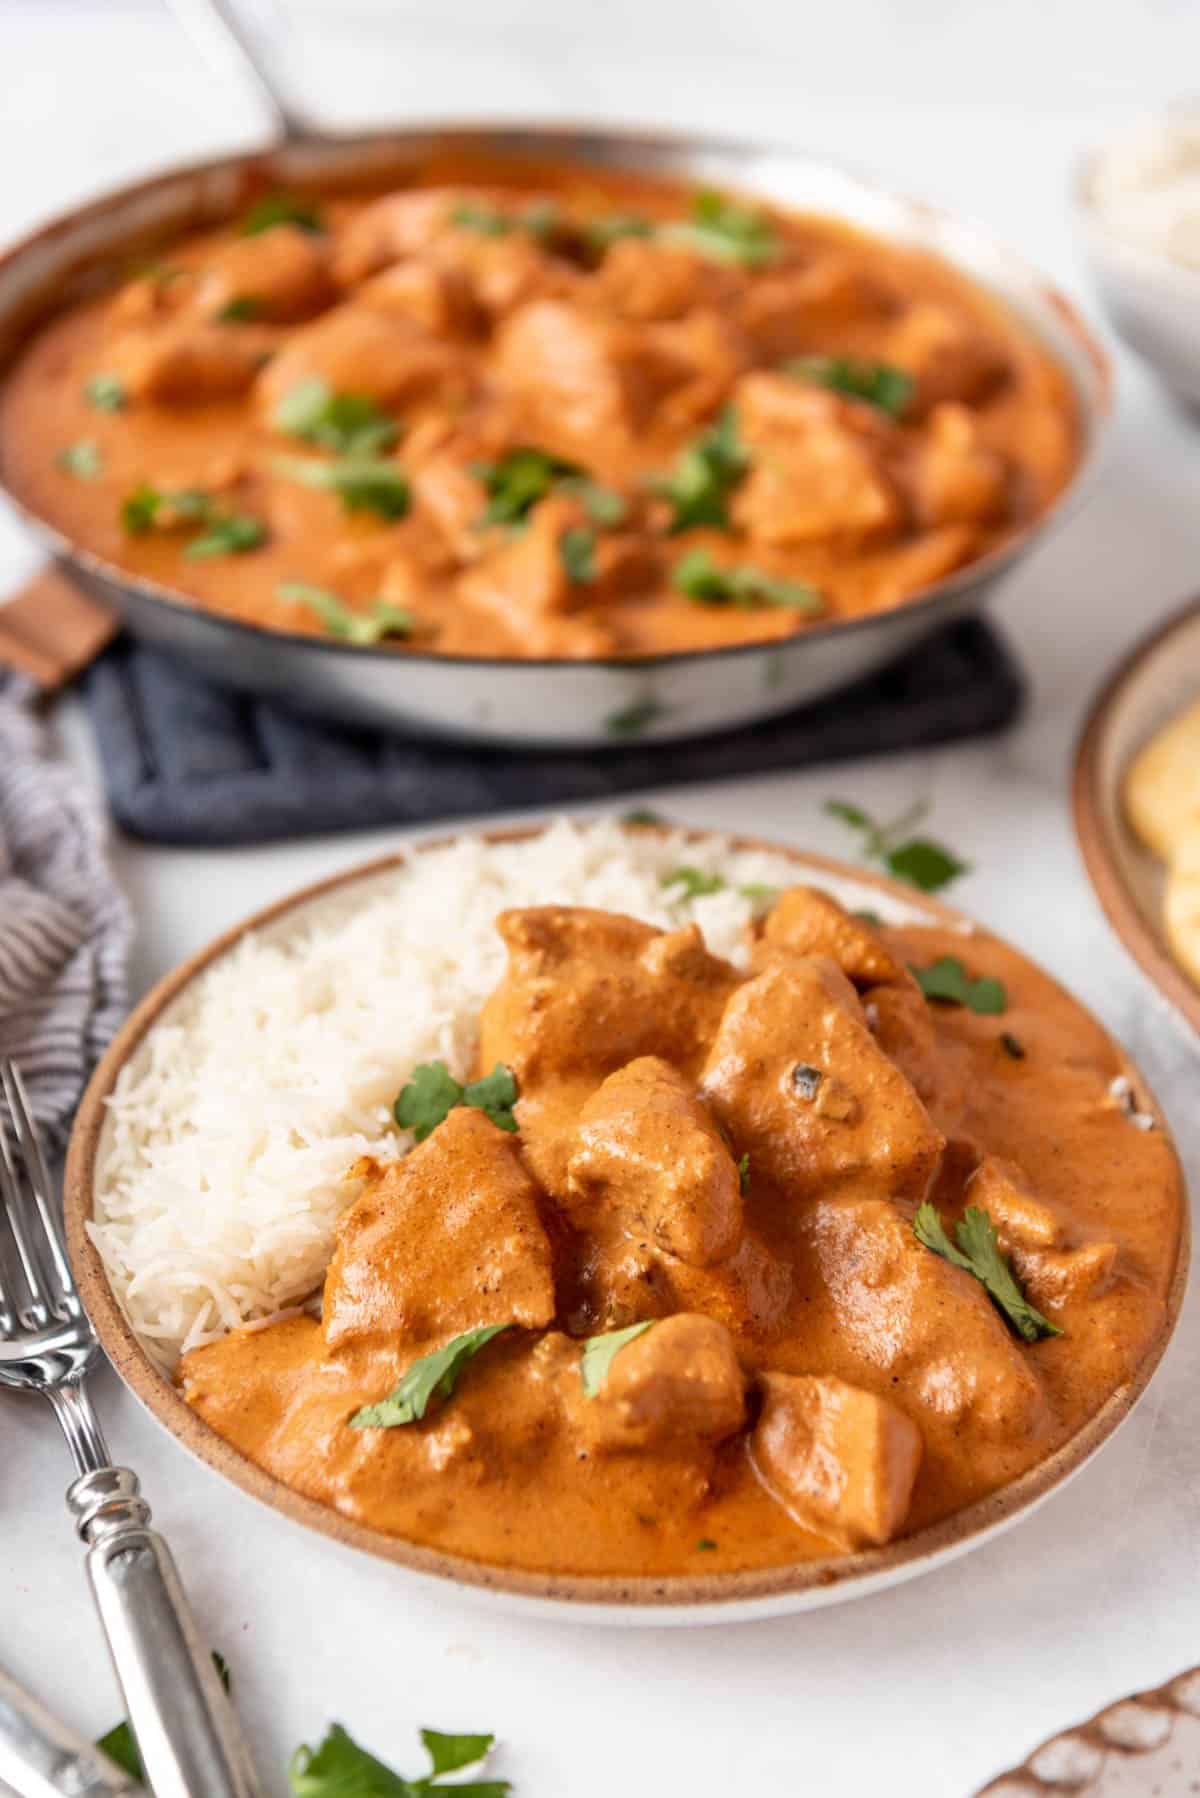 Chunks of chicken in a homemade tikka masala sauce on a plate with white rice.